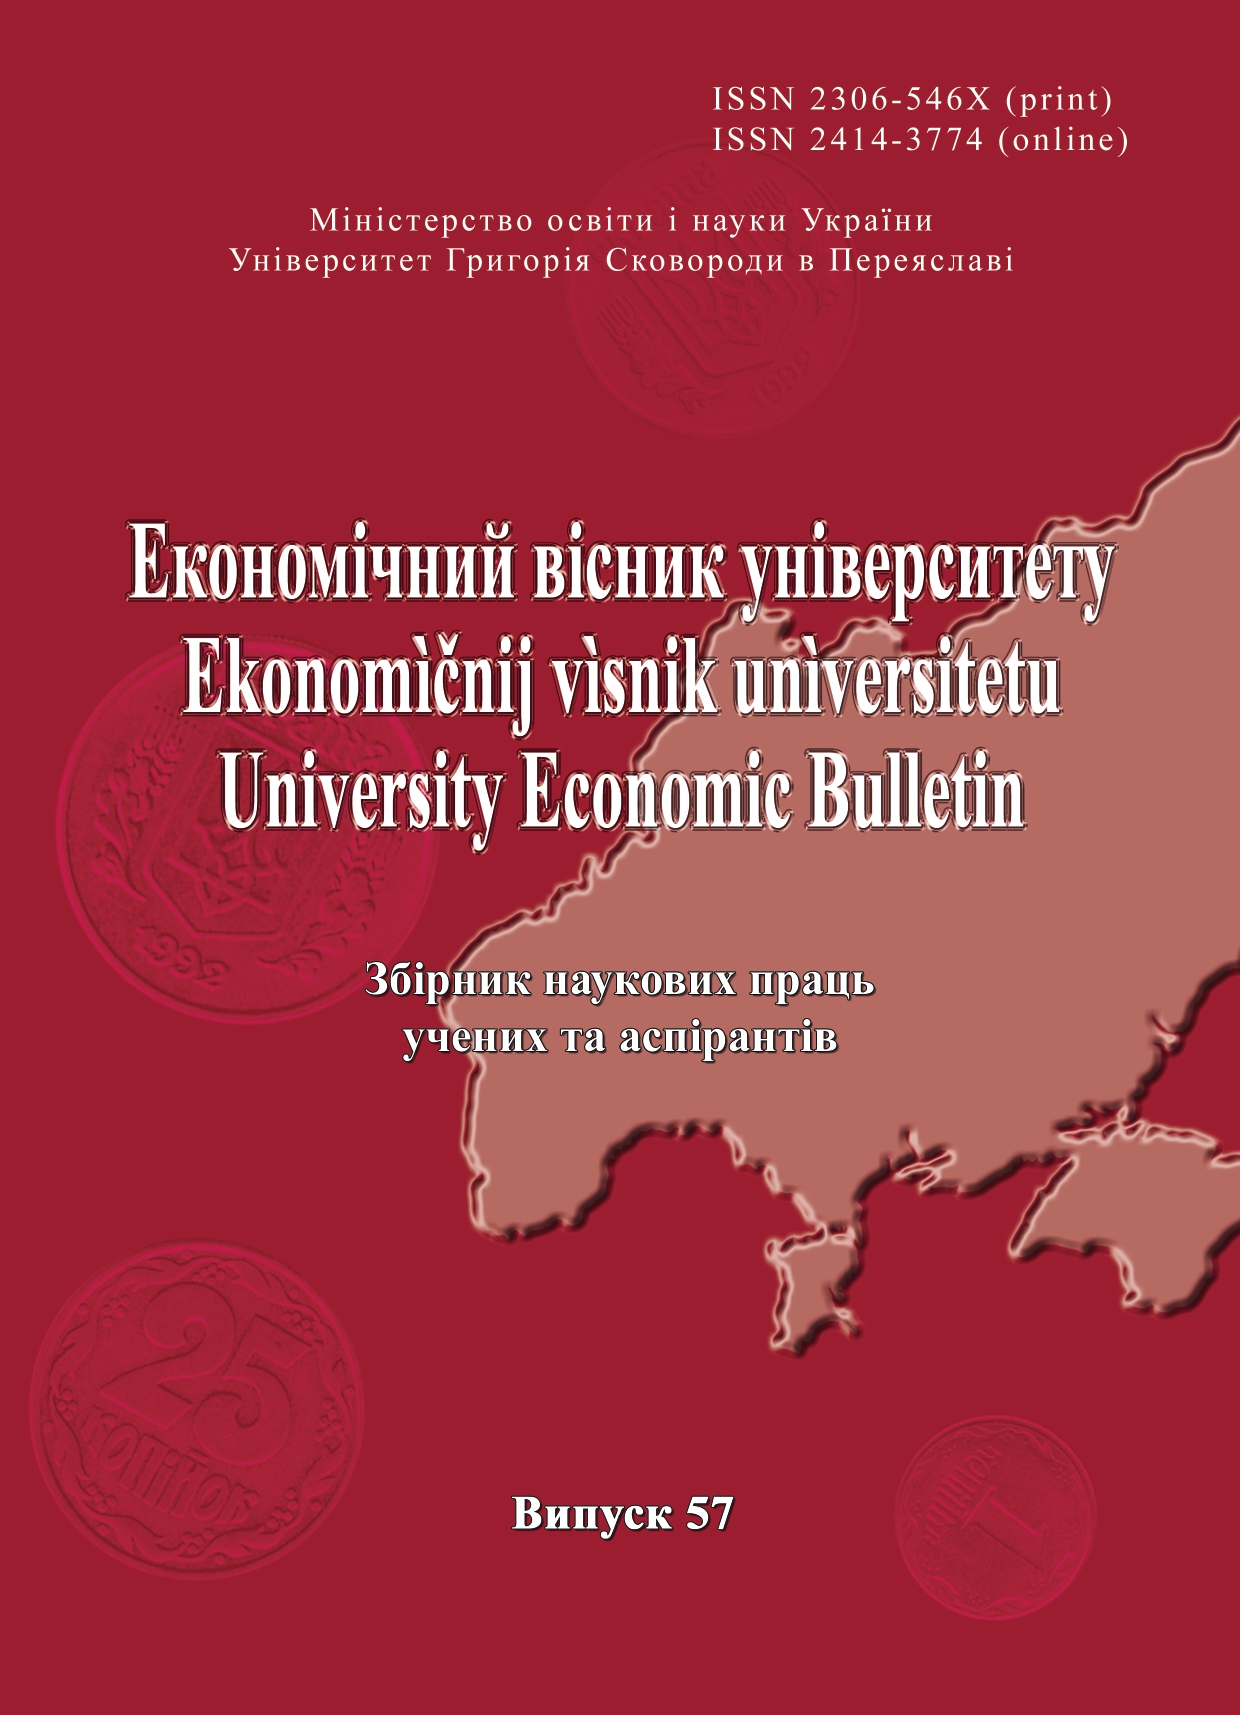 The labor market and technology of staff training for the post-war reconstruction of Ukraine Cover Image